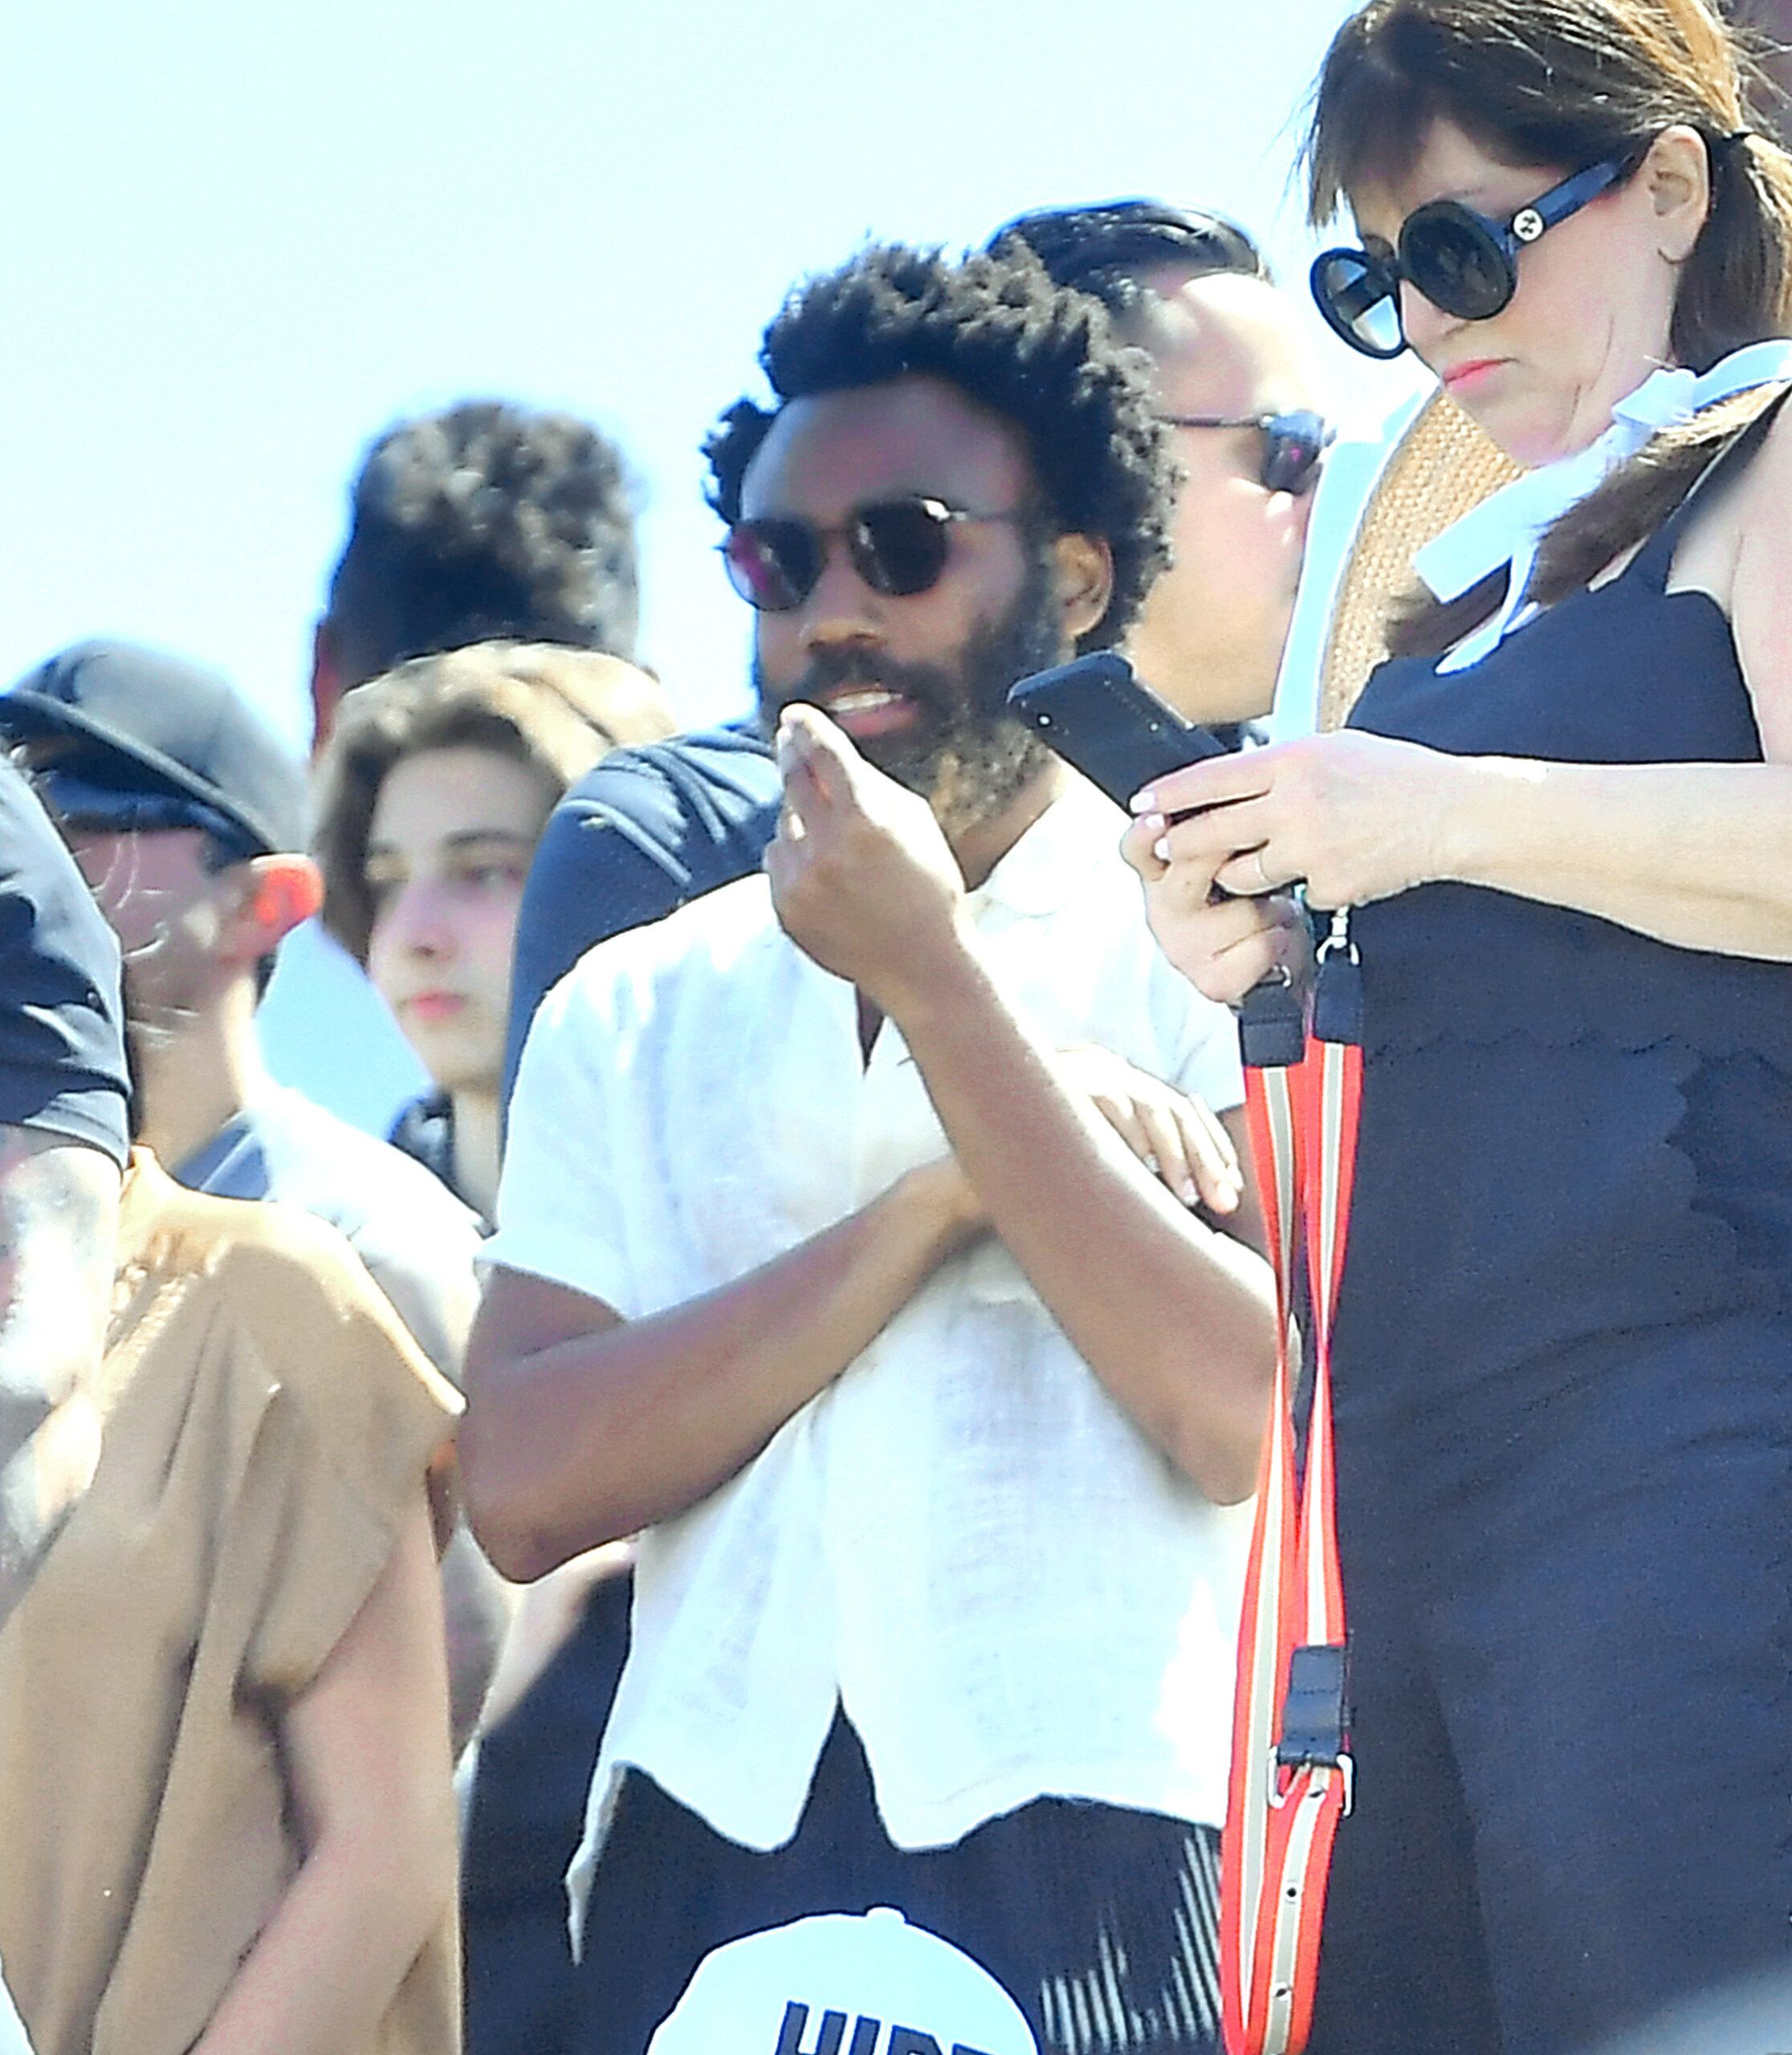 Hailey Baldwin and Donald Glover aka Childish Gambino hang out with Kendall Jenner and the rest of the Kardashian clan at Kanye West apos s apos Church Sunday Services apos at Coachella in Indio CA